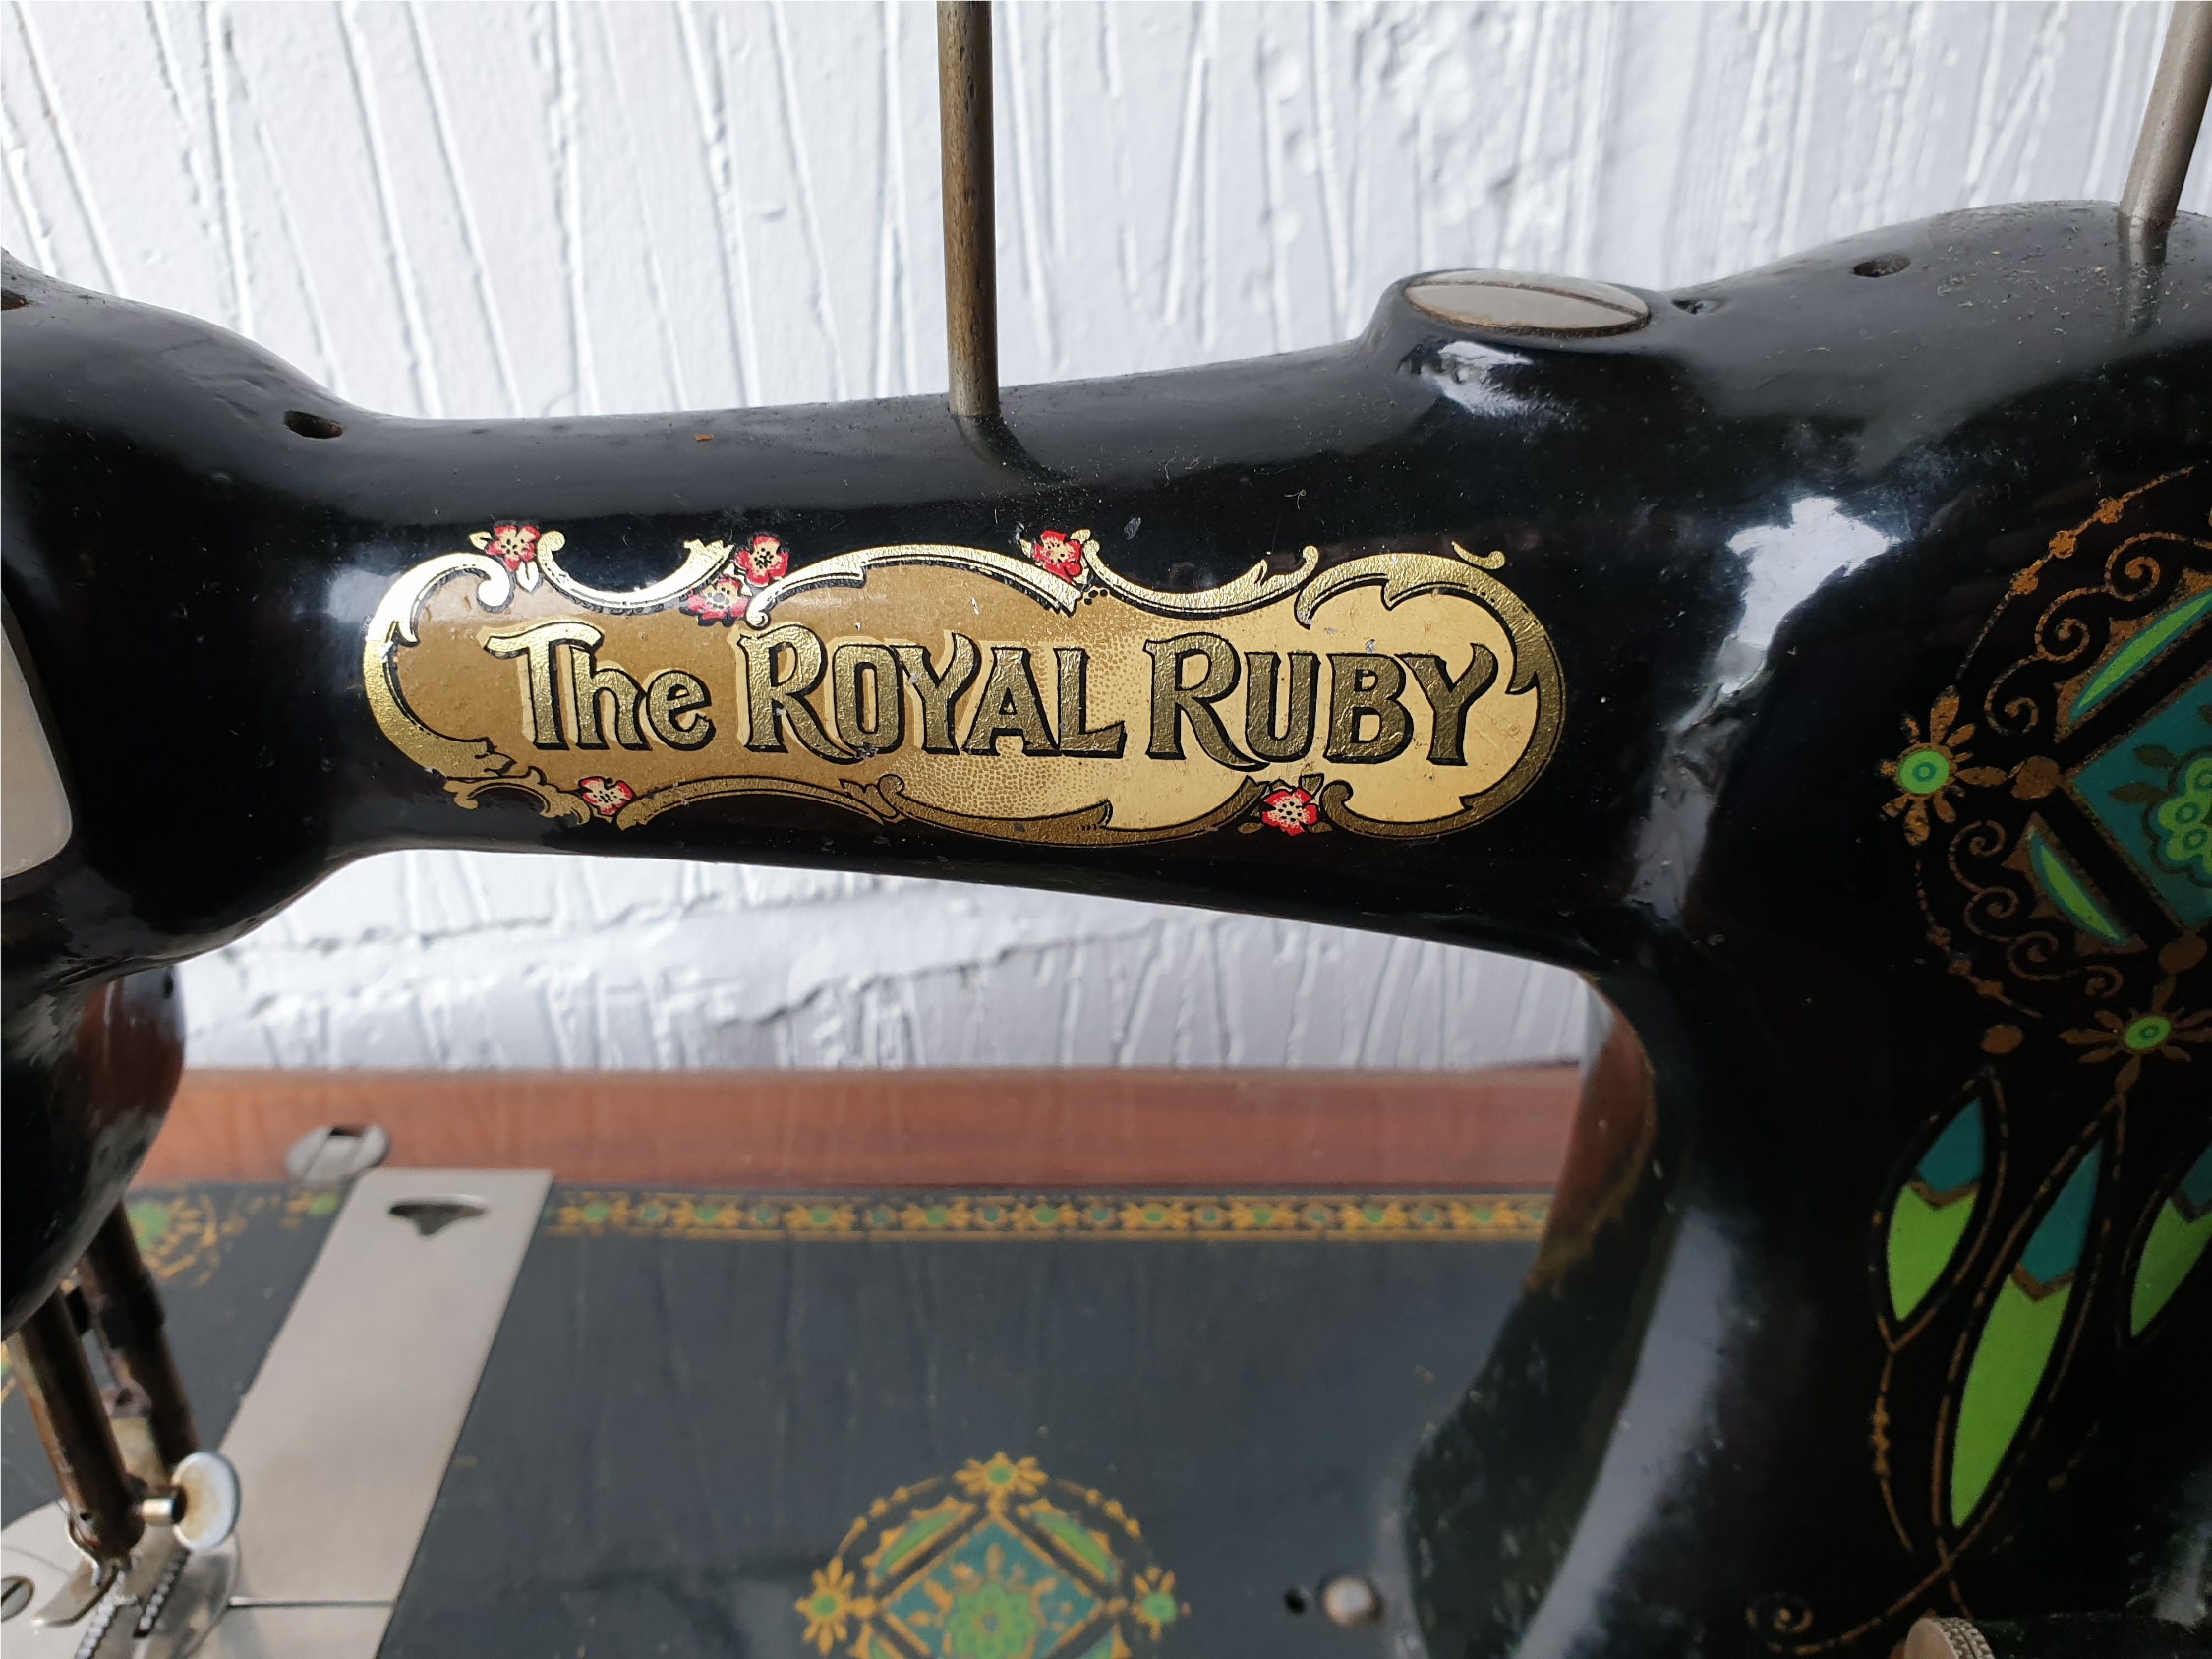 Vintage The Royal Ruby Sewing Machine - Image 3 of 5